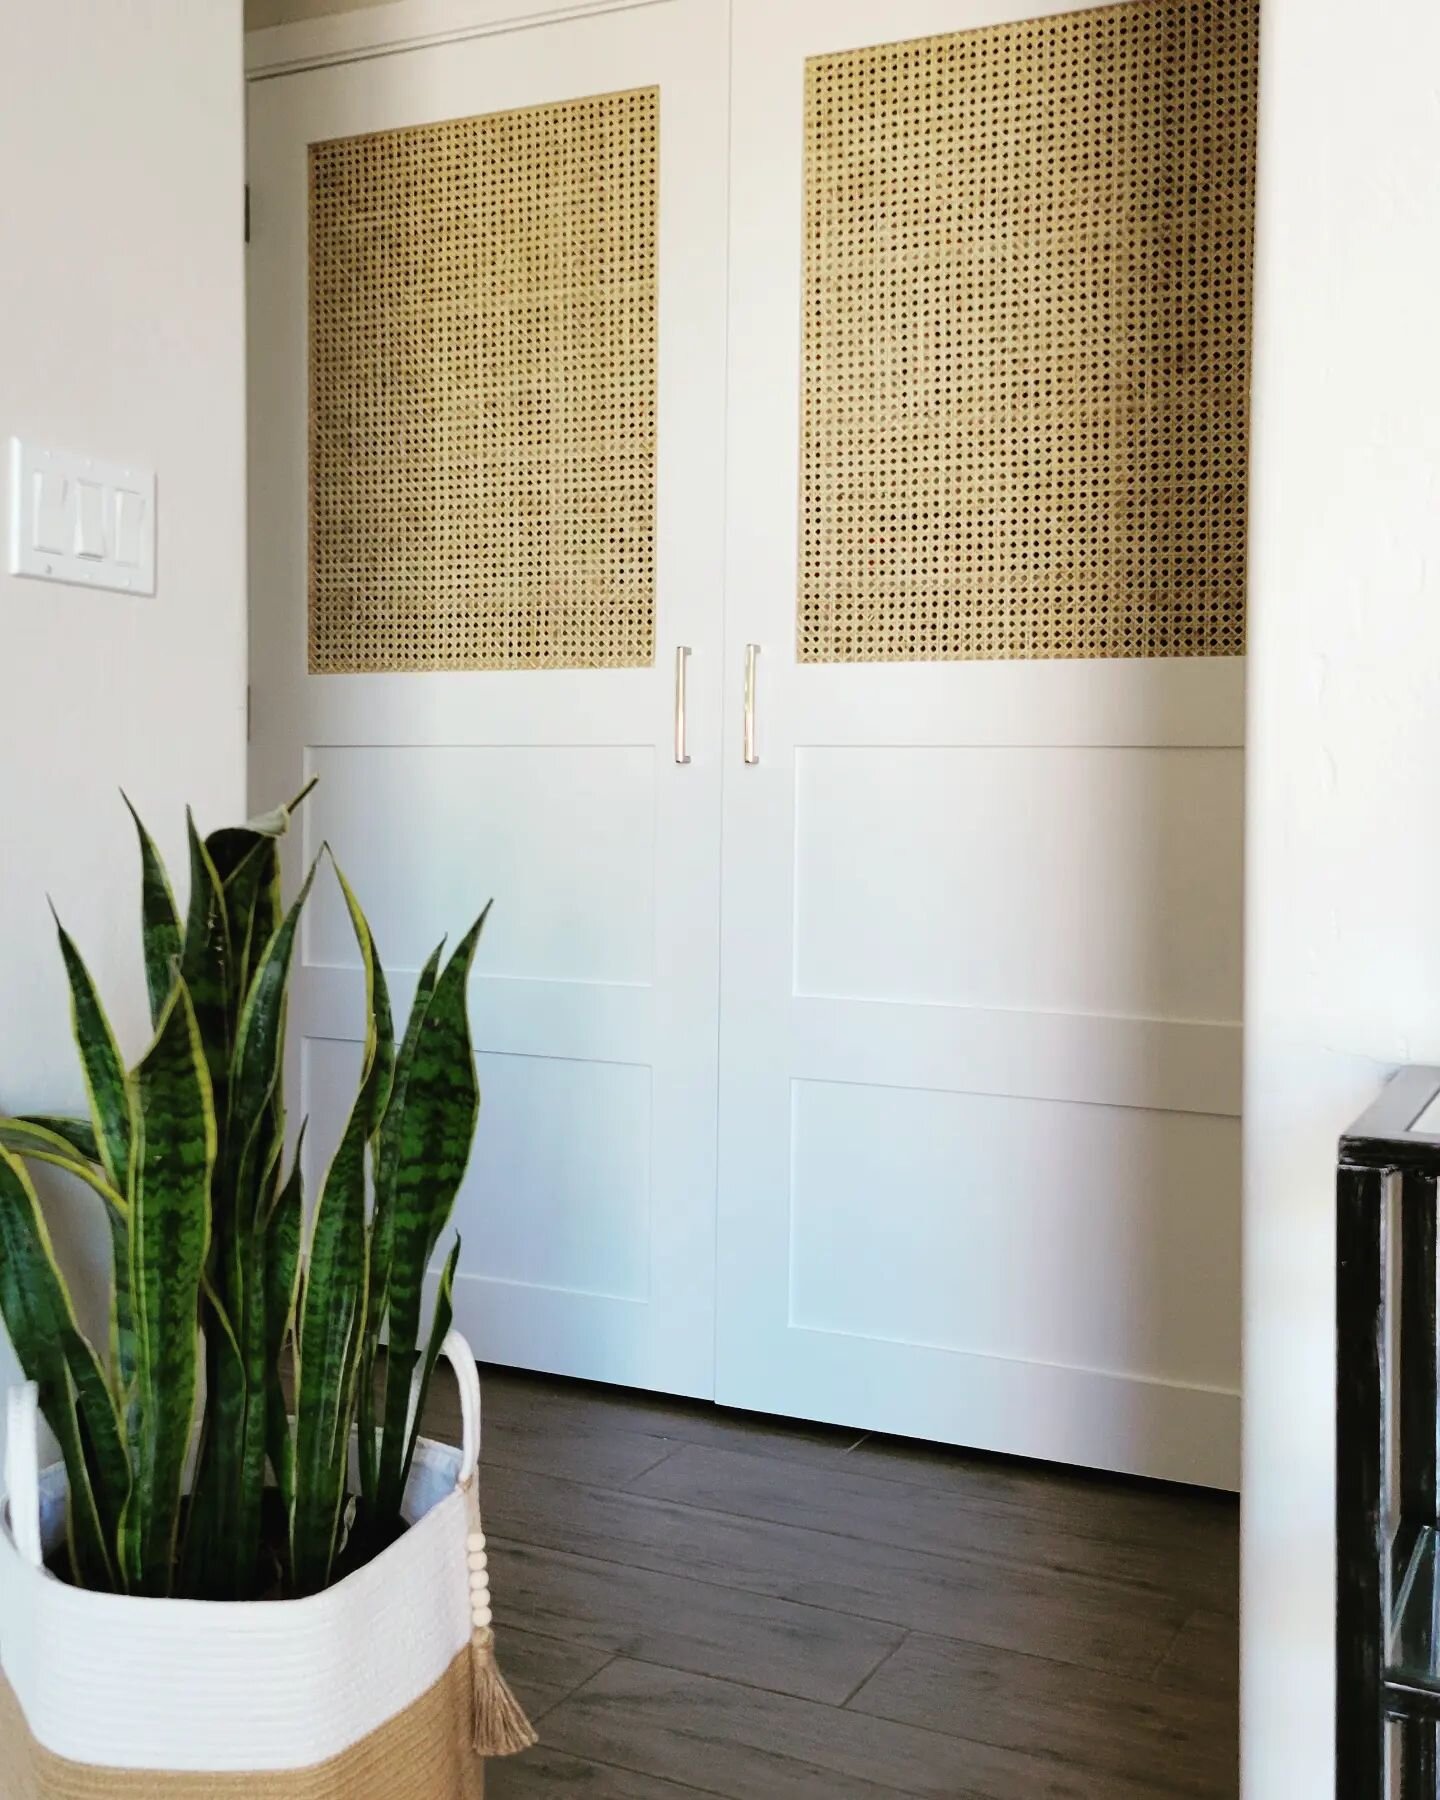 What a great way to add interest to your pantry doors! We installed caning on these at my client's house and we just love them 😍
It's a beautiful, natural touch!

#pantry #caning #scottsdalehomes #interiordesign